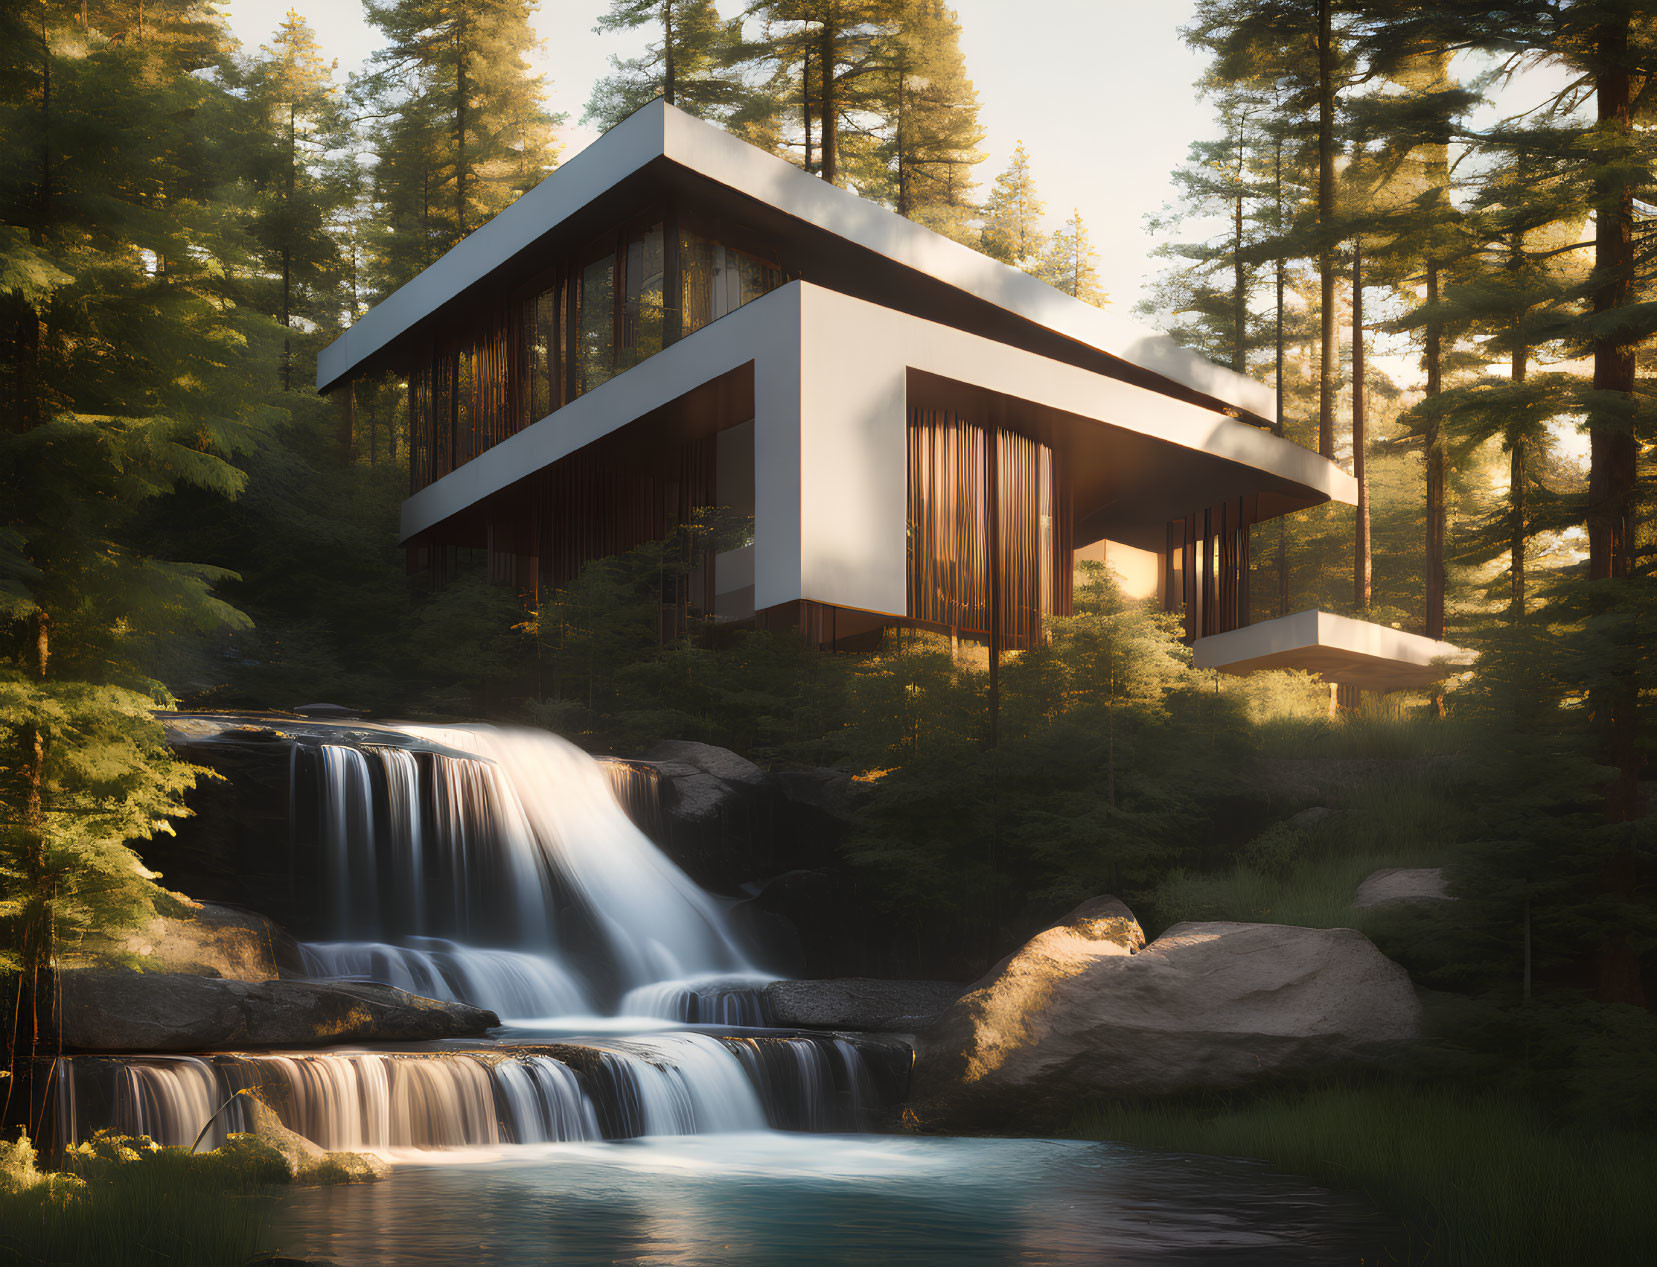 Modern architectural house with large glass windows overlooking waterfall in forest sunset.